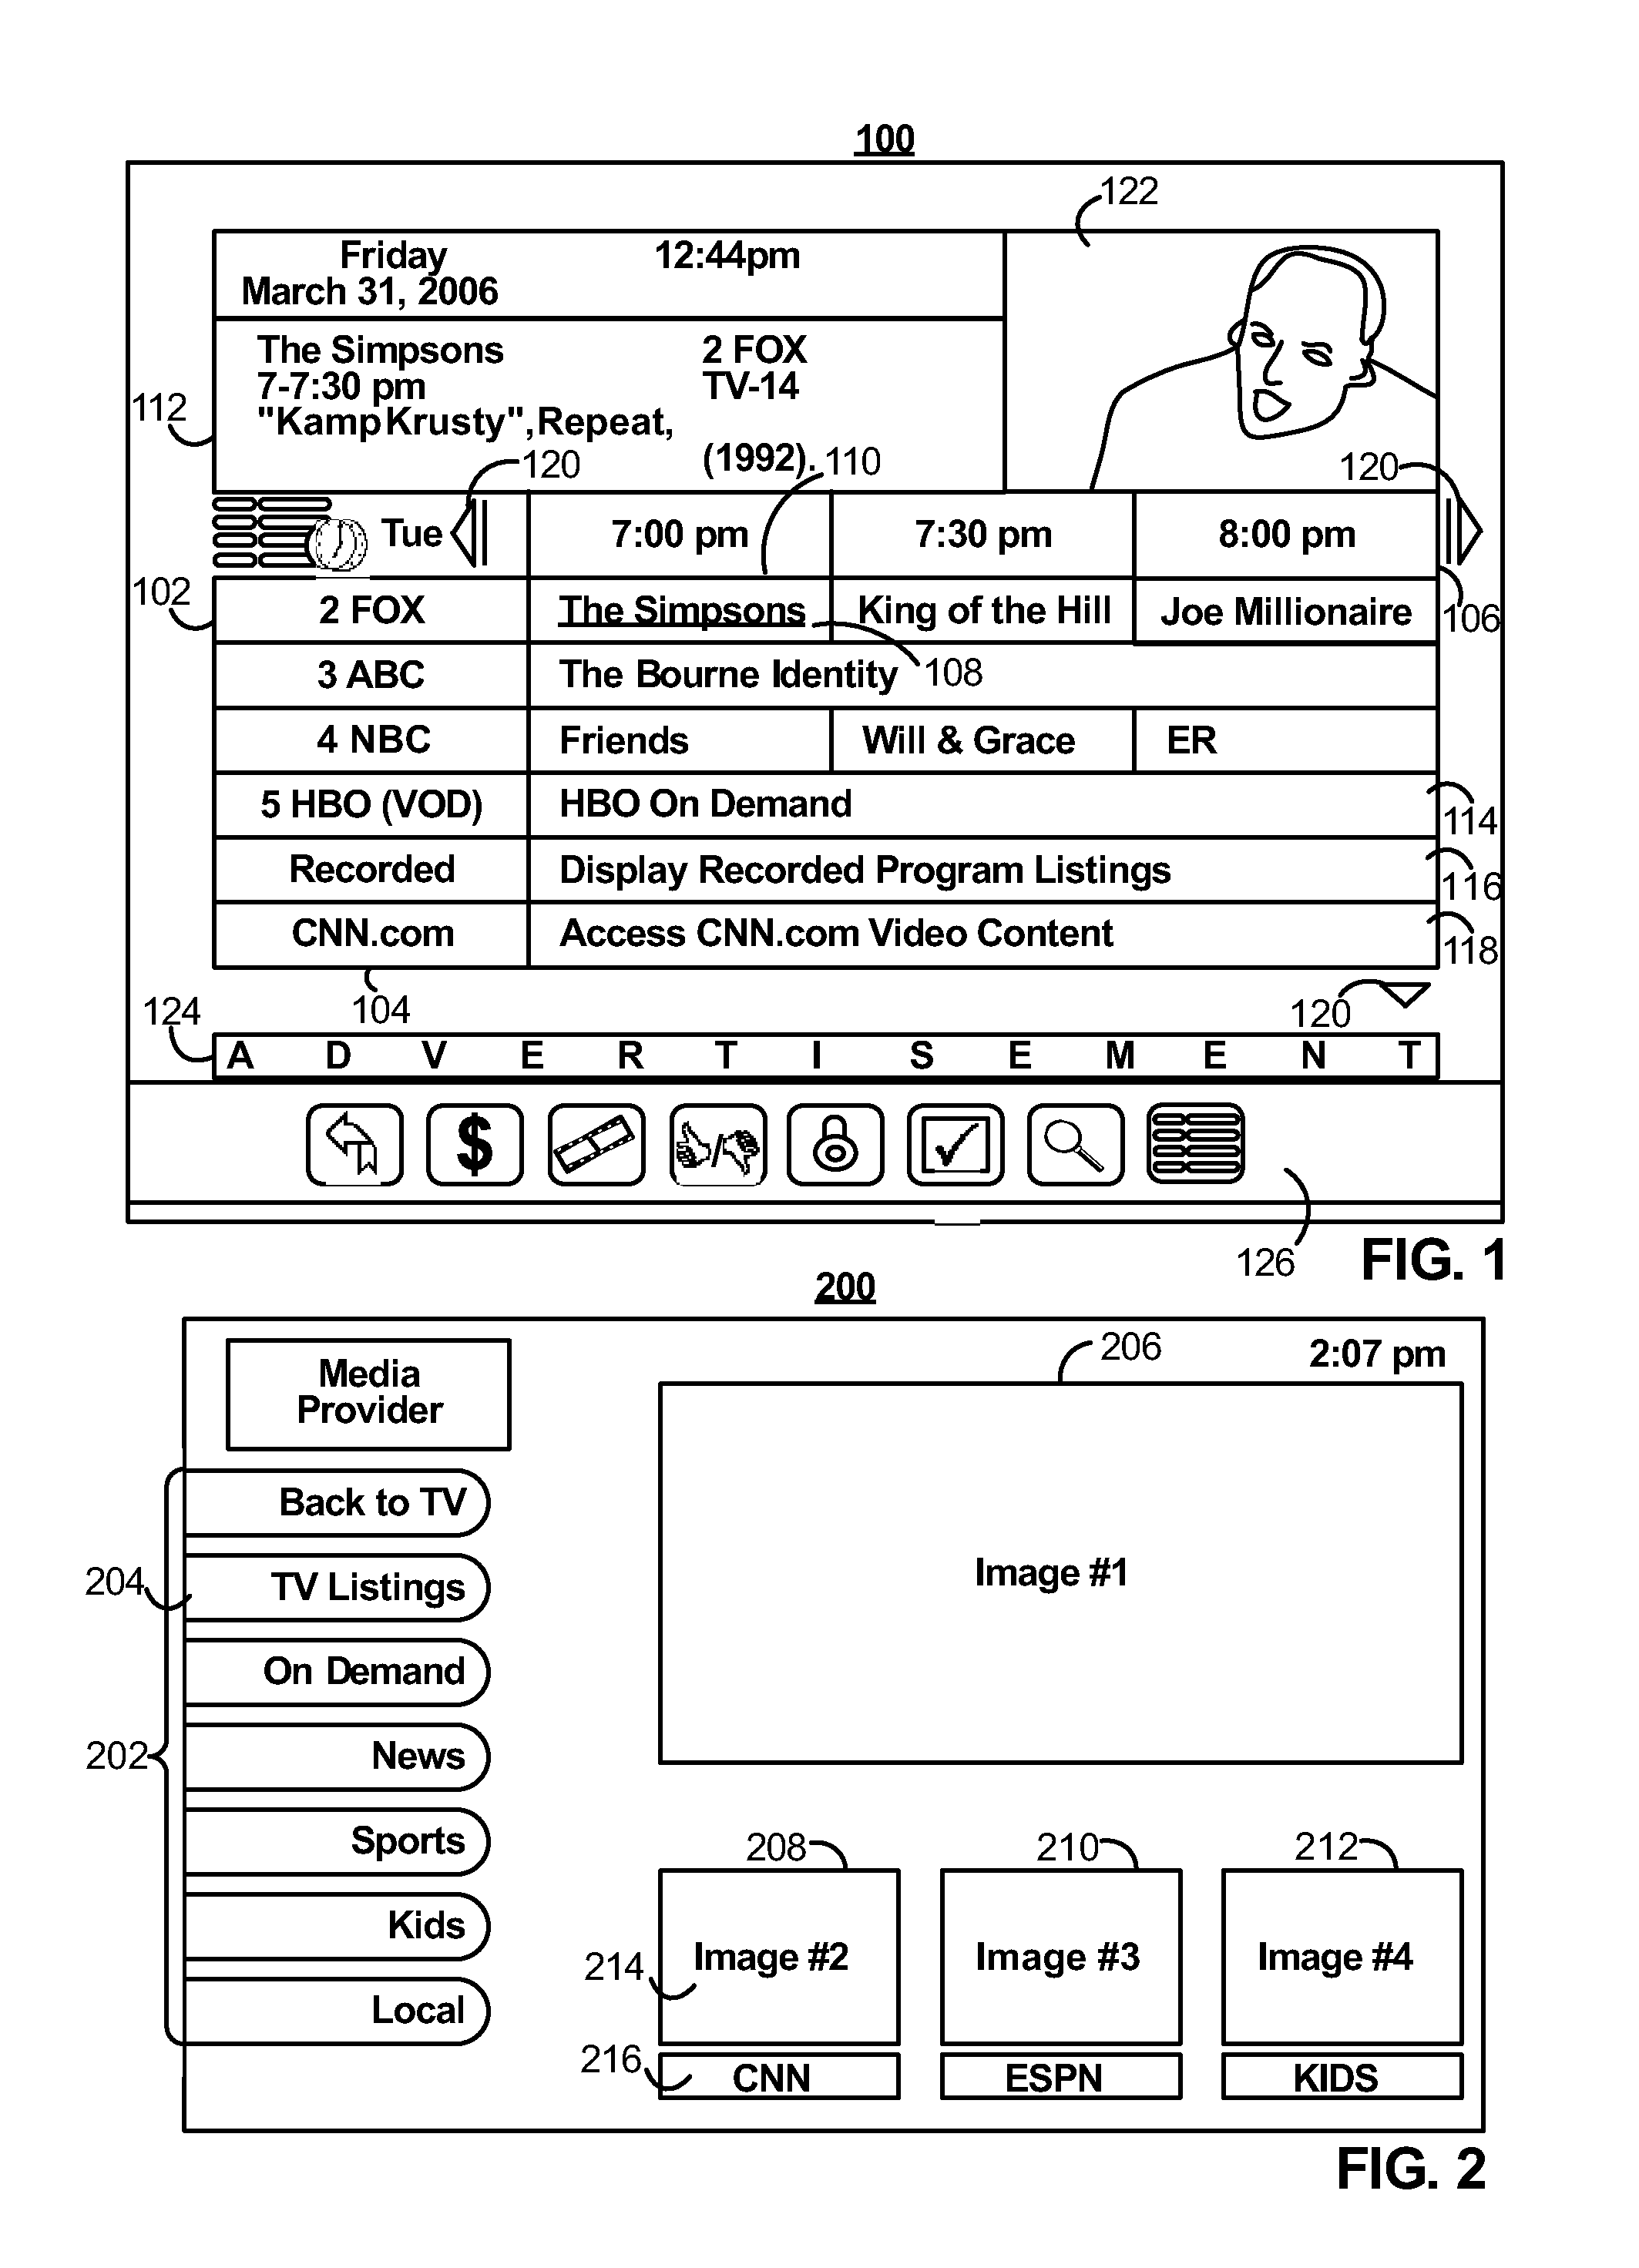 Systems and methods for latency-based synchronized playback at multiple locations